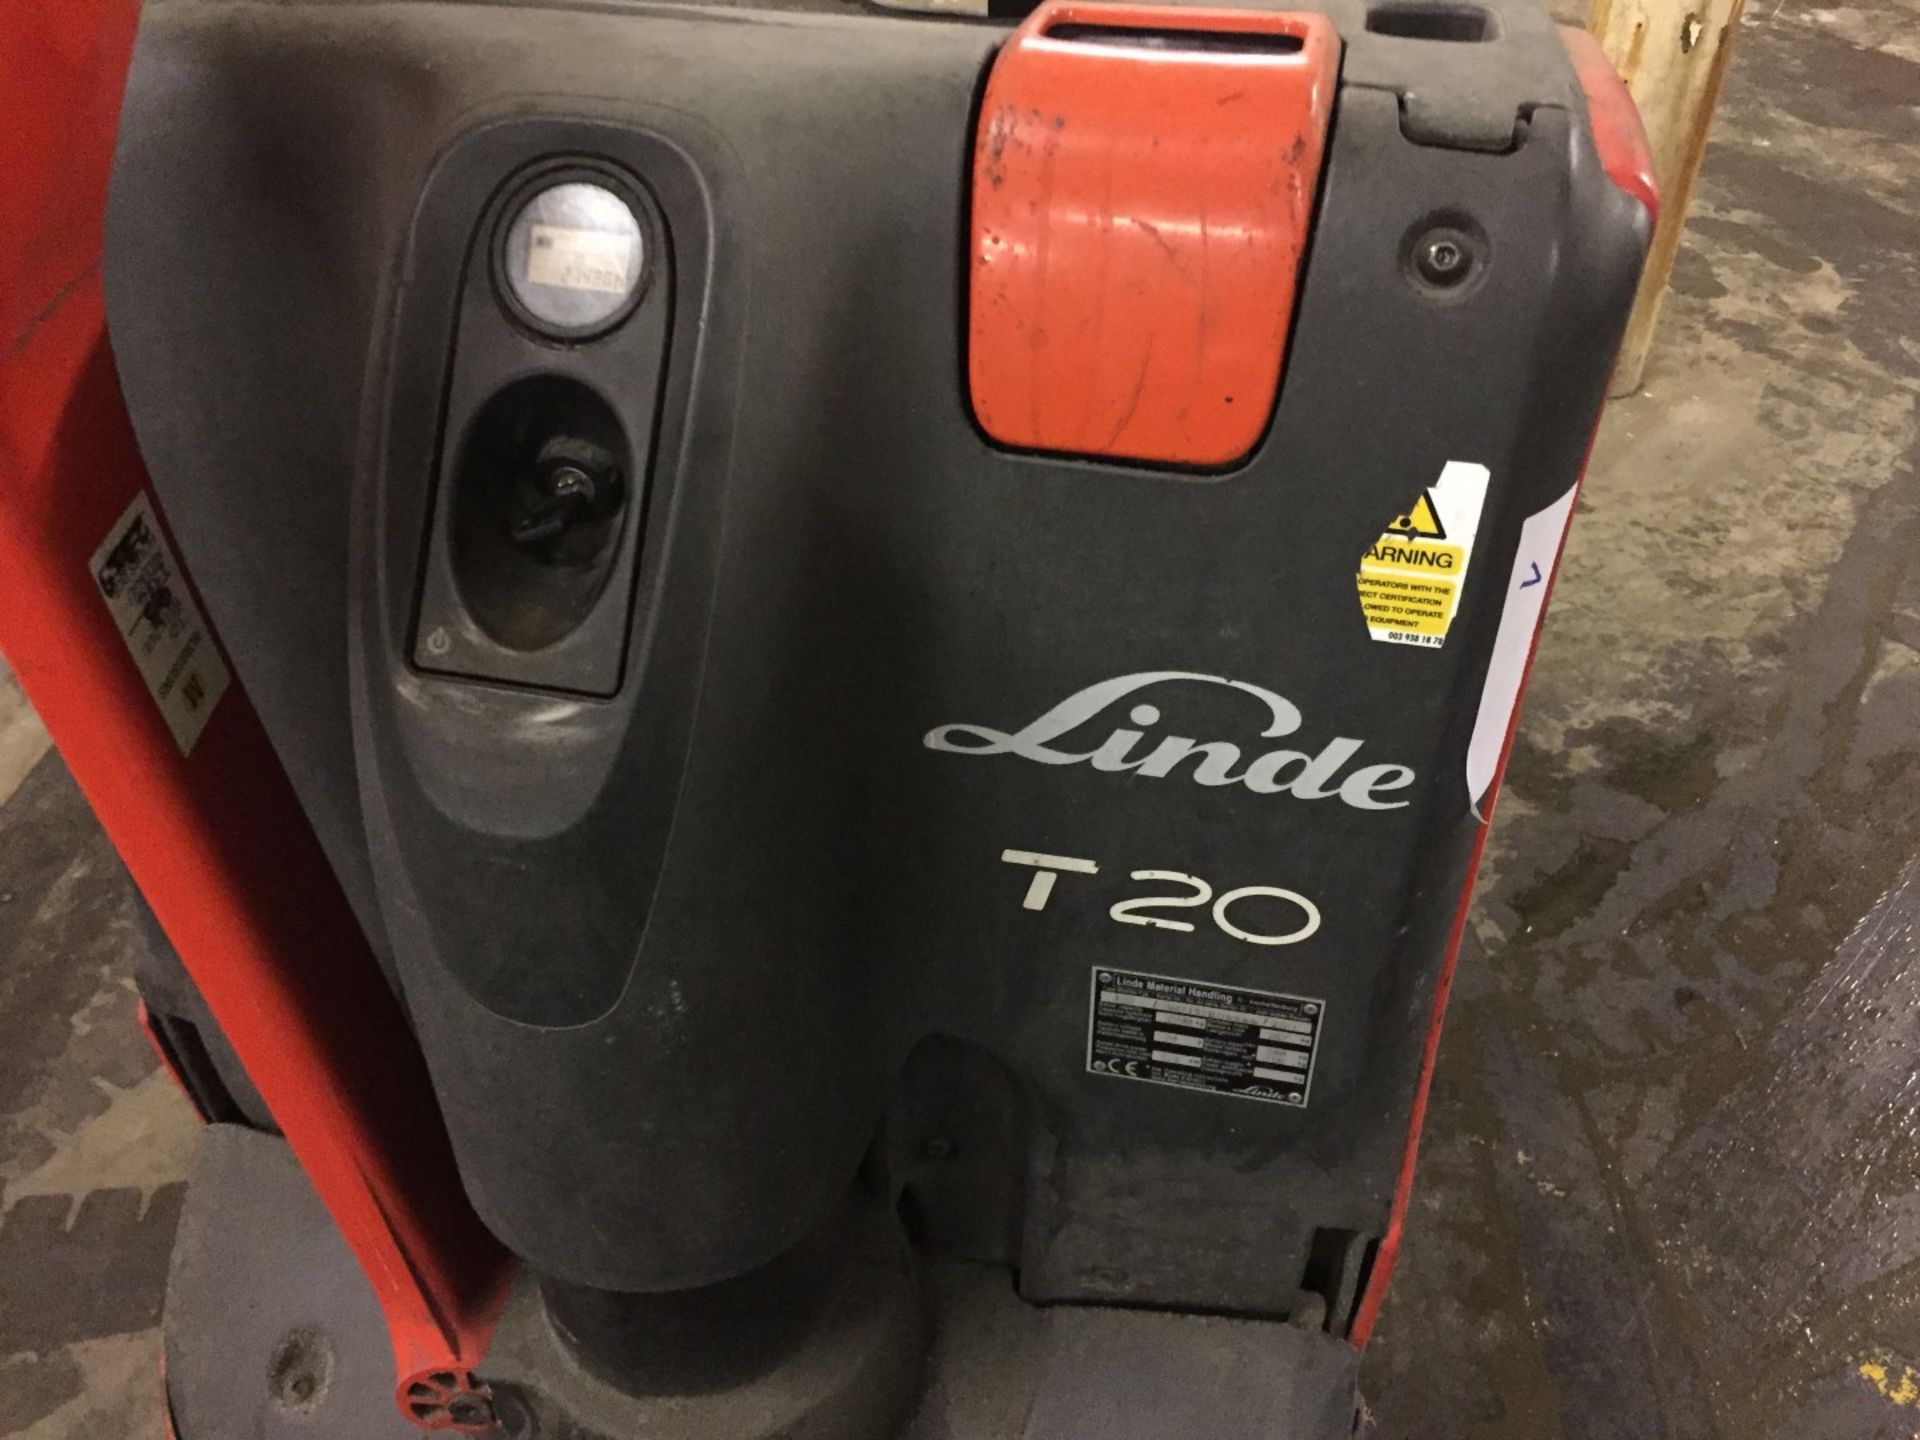 1 x Linde T20 Electric Pallet Truck - Tested and Working - Charger Included - CL007 - Ref: T20/1 - - Image 9 of 12